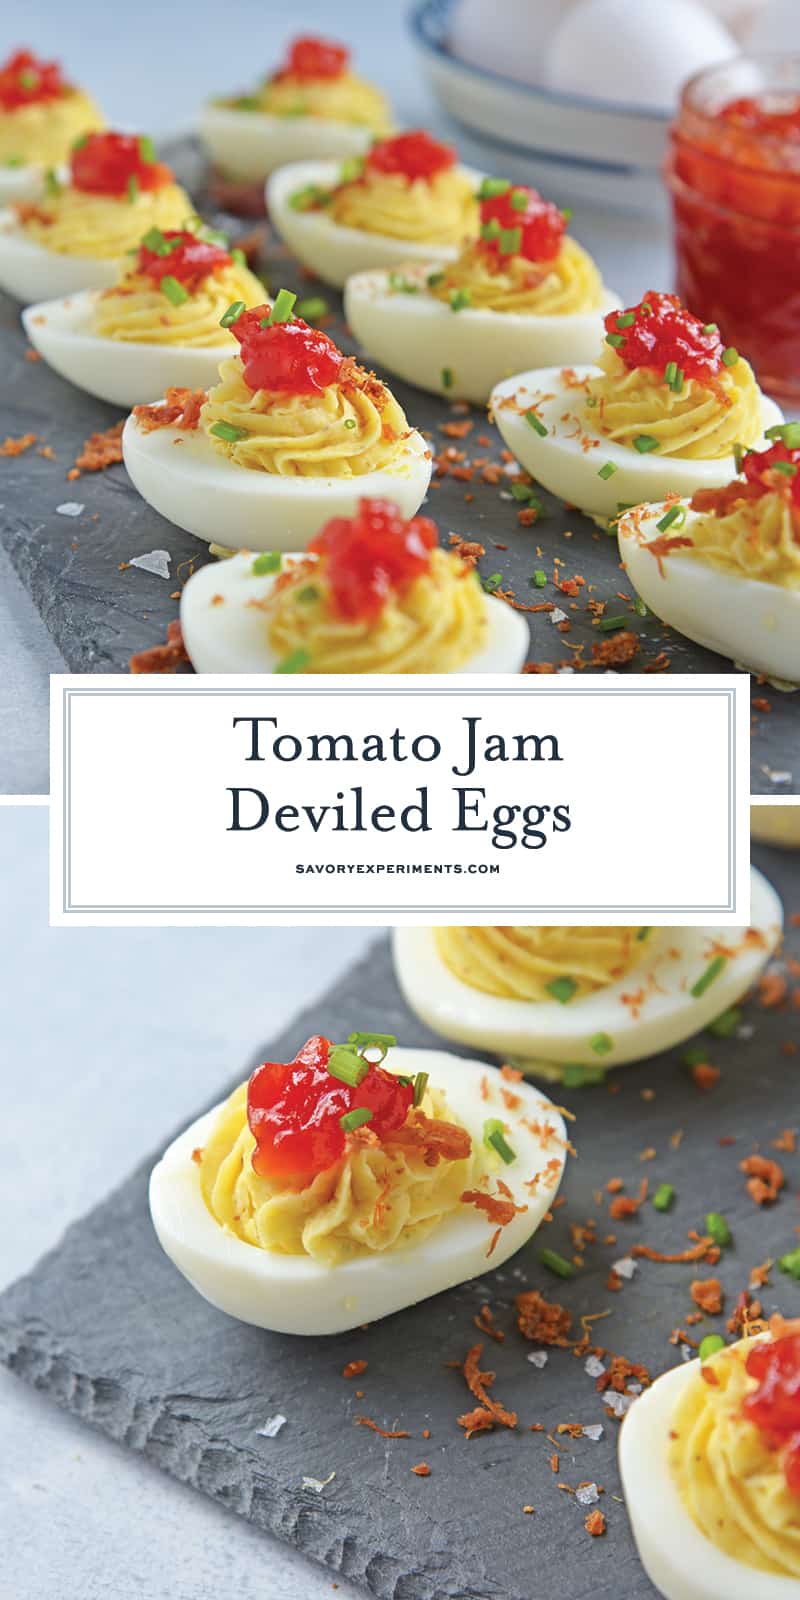 Tomato Jam Deviled Eggs use sweet tomato jam with tangy horseradish in a devilishly creamy deviled egg filling. Top with chives and serve! #deviledeggs www.savoryexperiments.com 